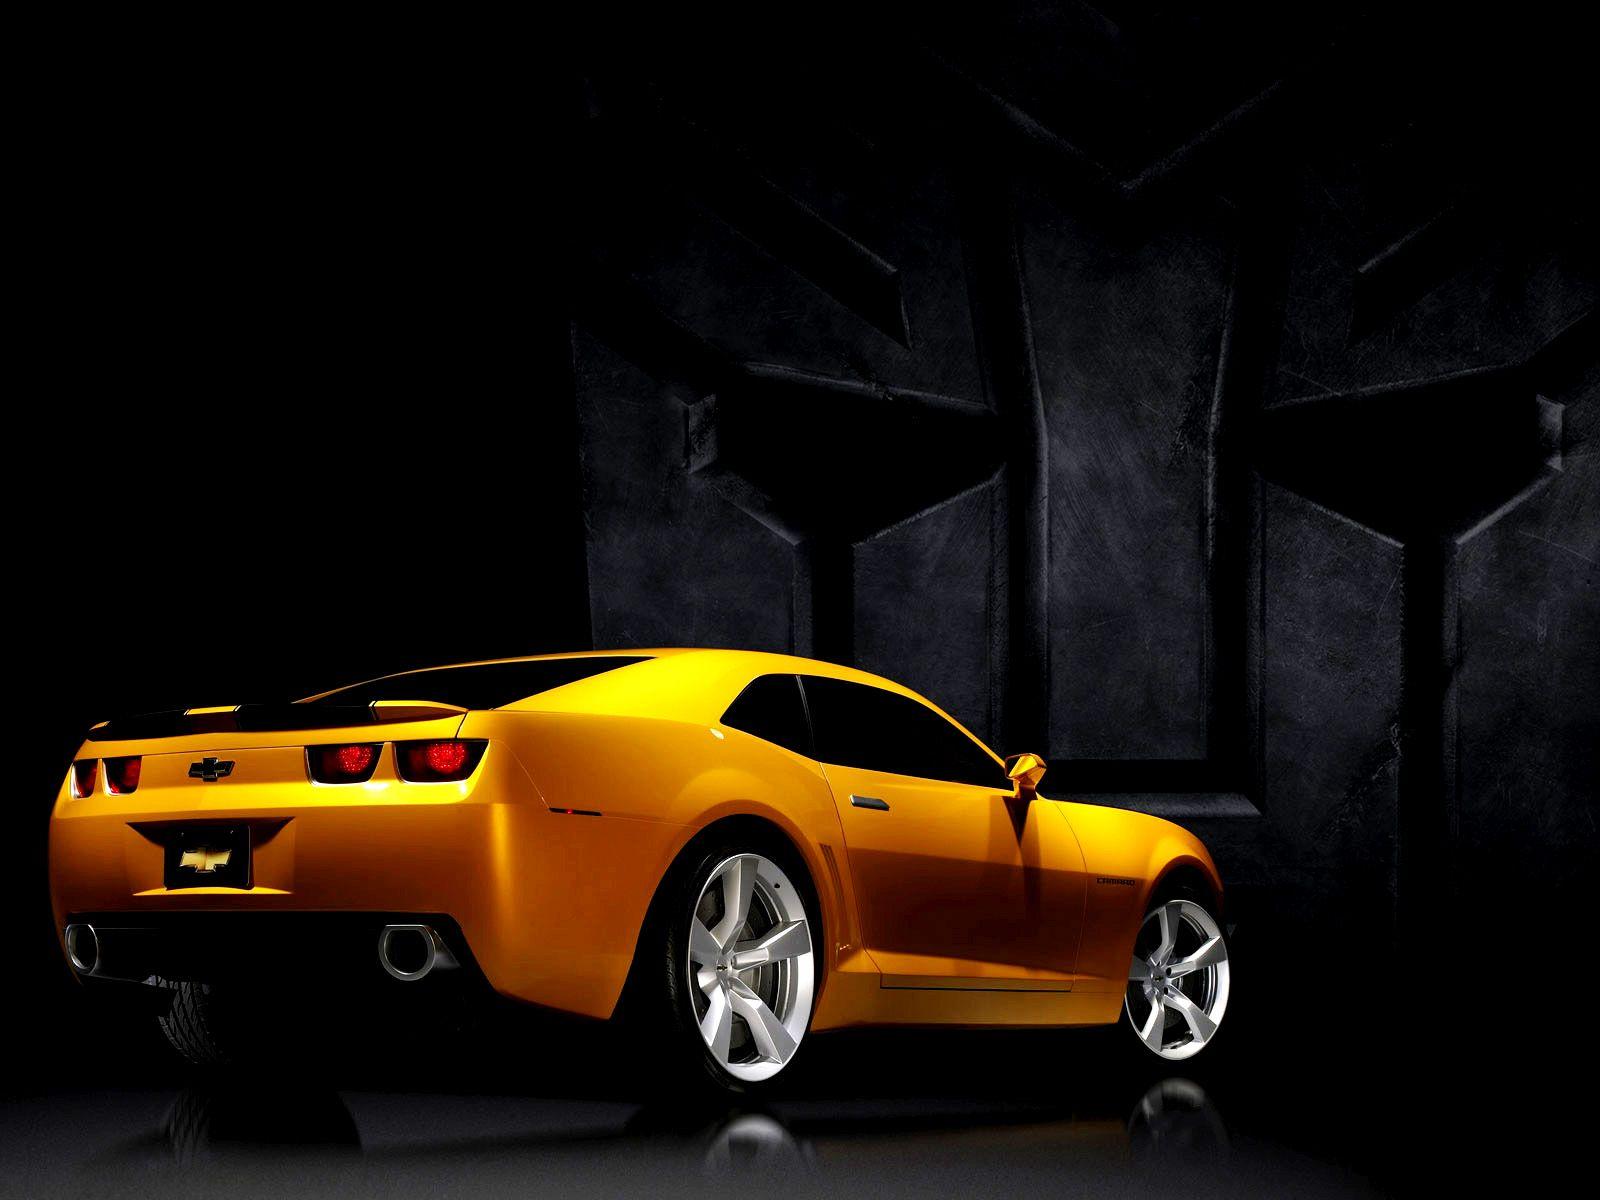 Image detail for -Bumblebee Transformers HD Wallpaper Download